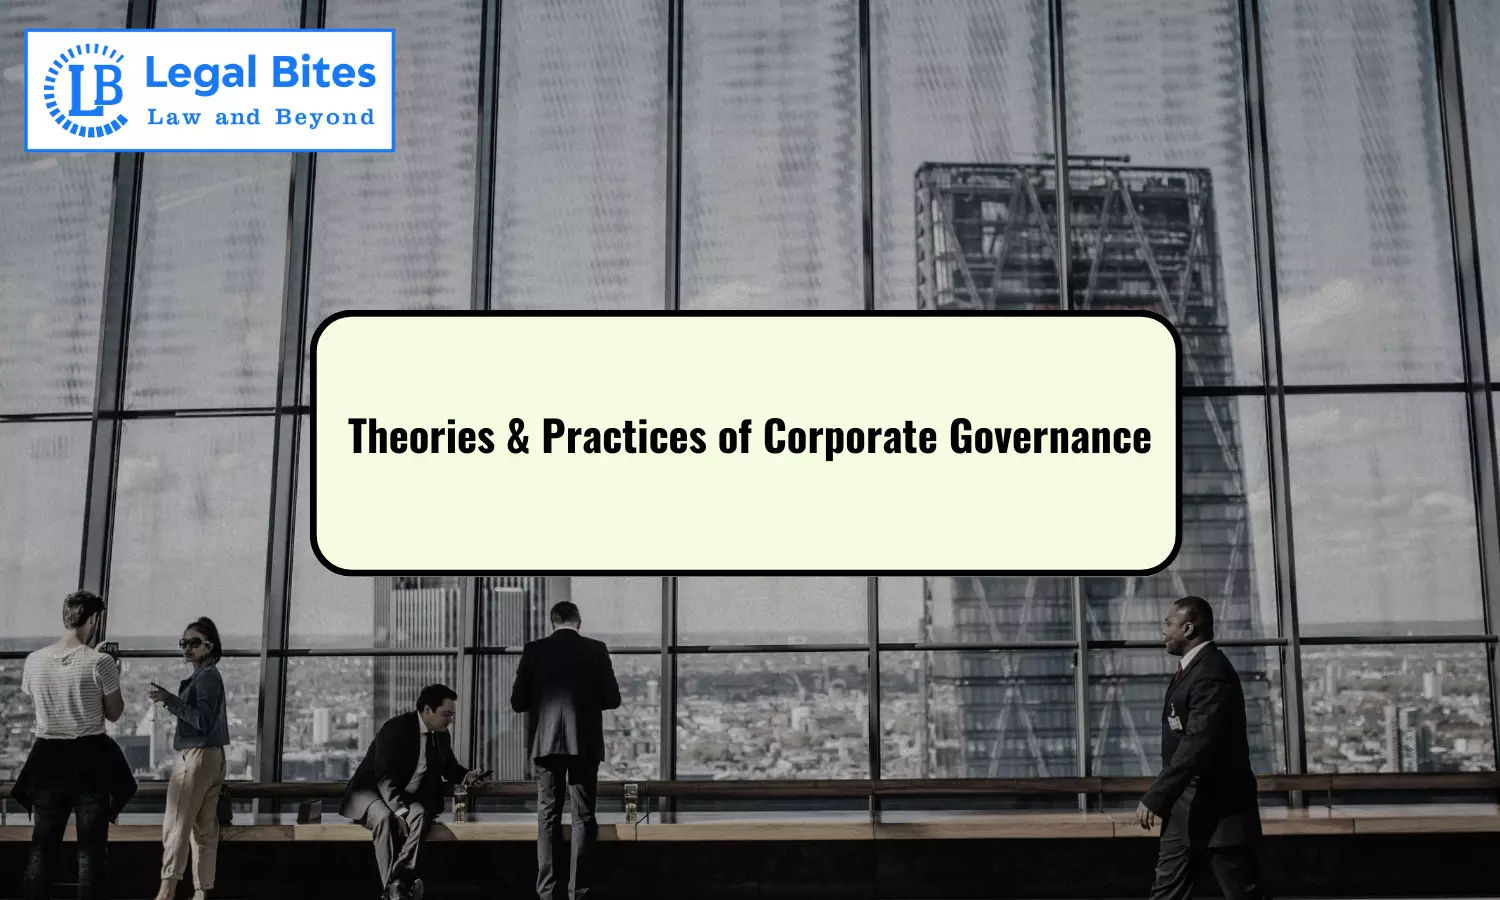 Theories & Practices of Corporate Governance